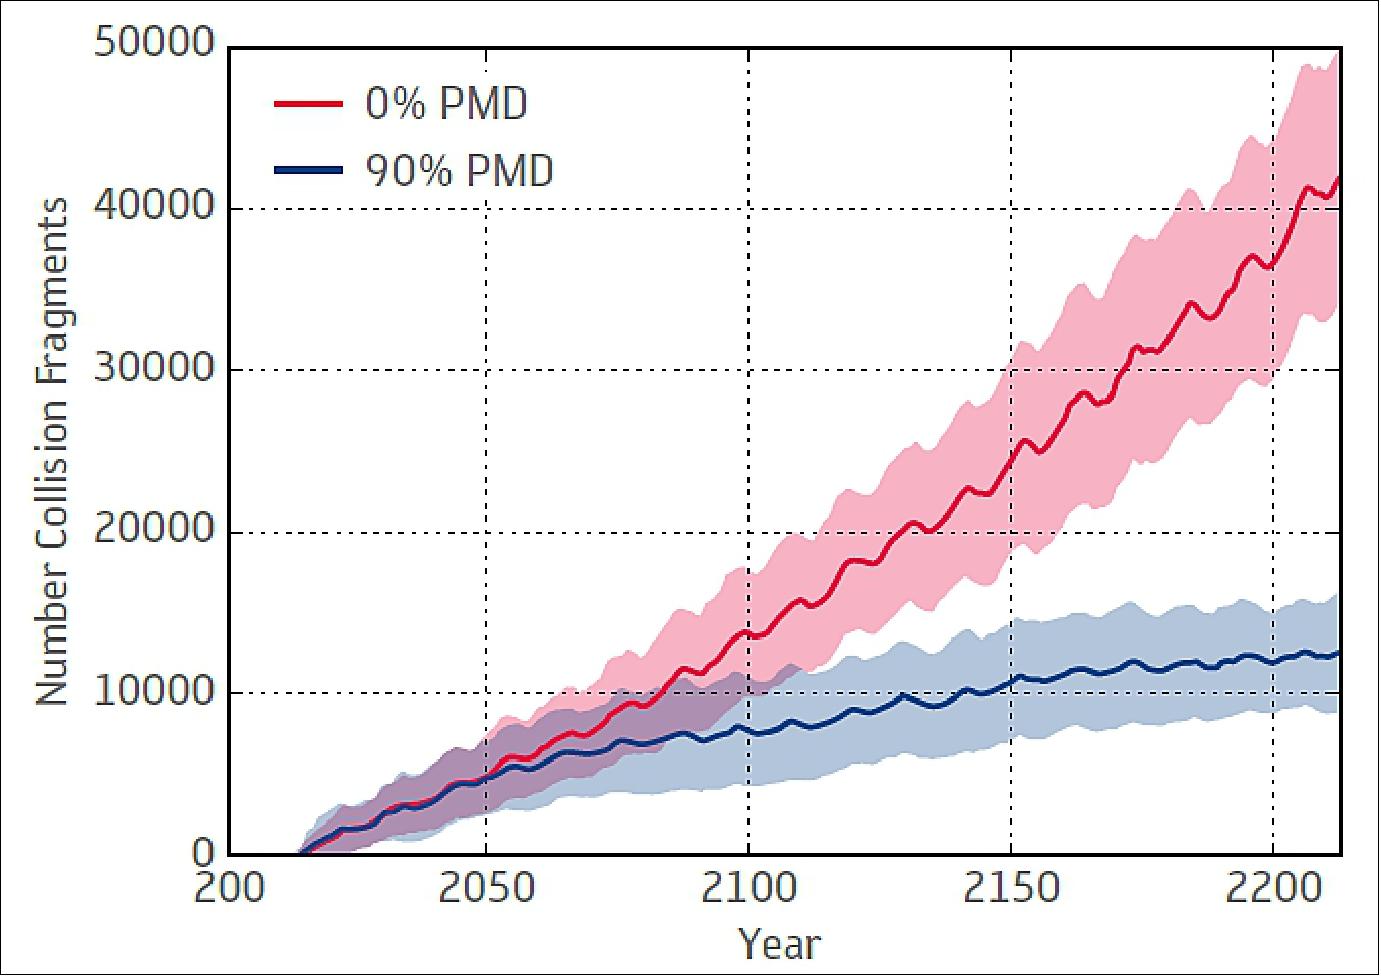 Figure 45: Projected evolution of the number of objects larger than 10 cm in LEO, depending on the adherence to PMD (Post Mission Disposal) guidelines (image credit: ESA)